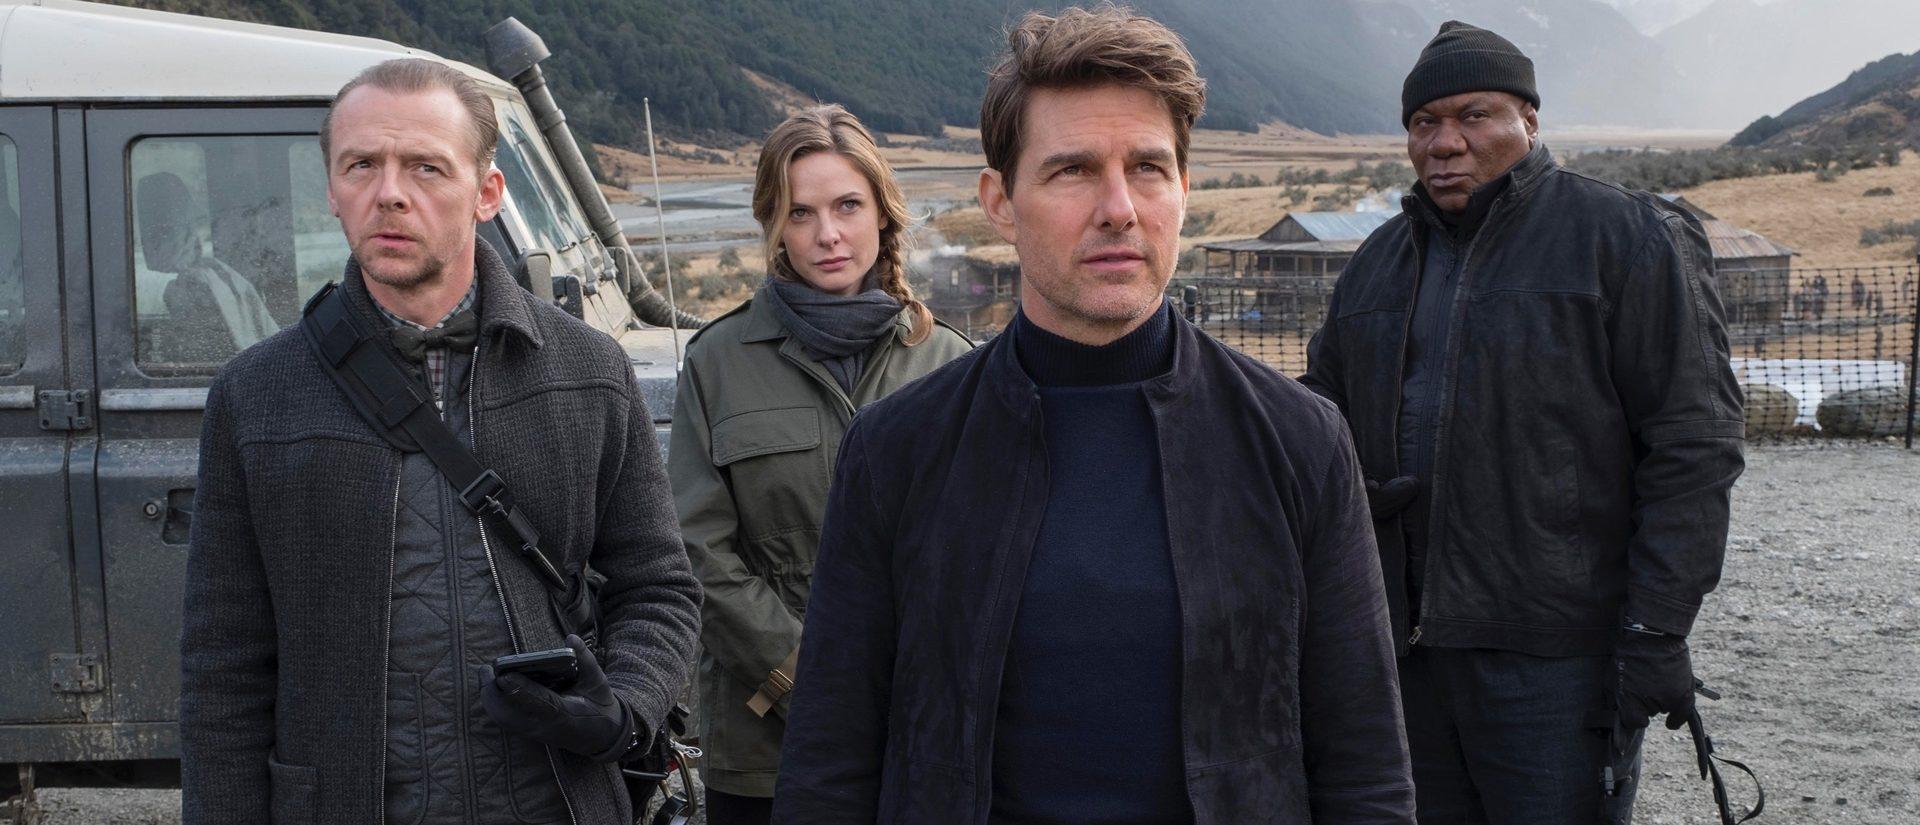 3840x2160 4k Wallpaper Mission Impossible 6 Fallout Movie 2018 B292